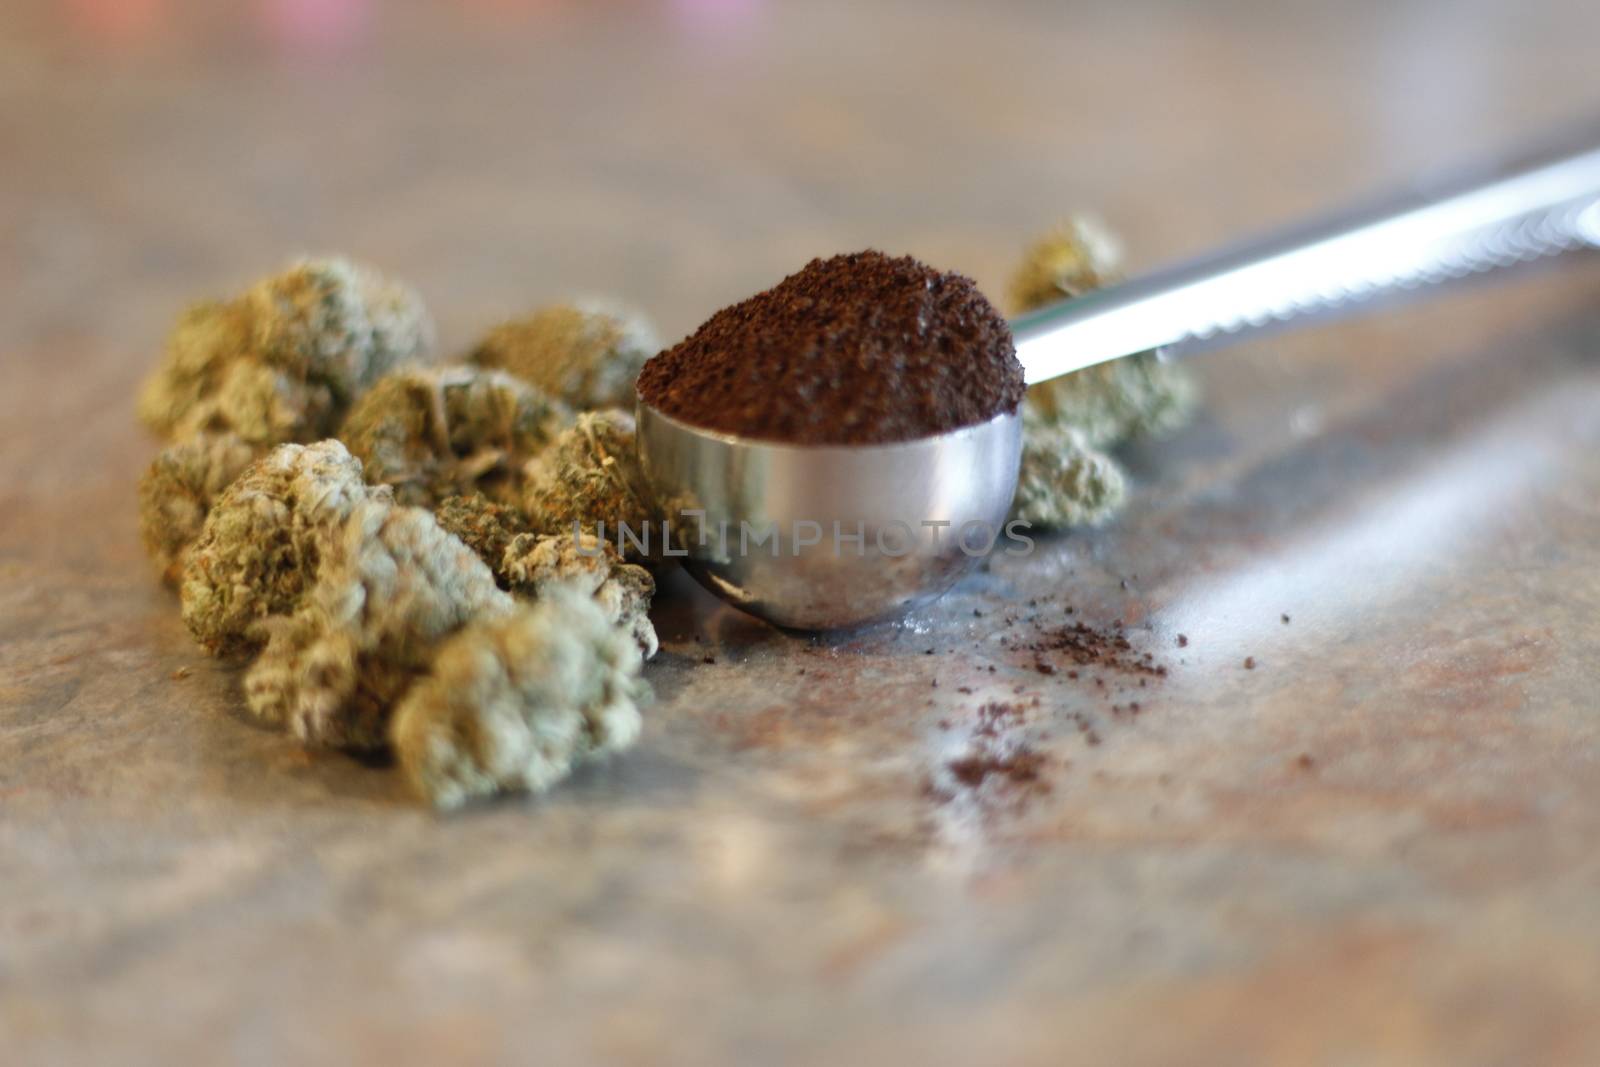 A scoop of coffee next to marijuana buds. Concept of cannabis infused products